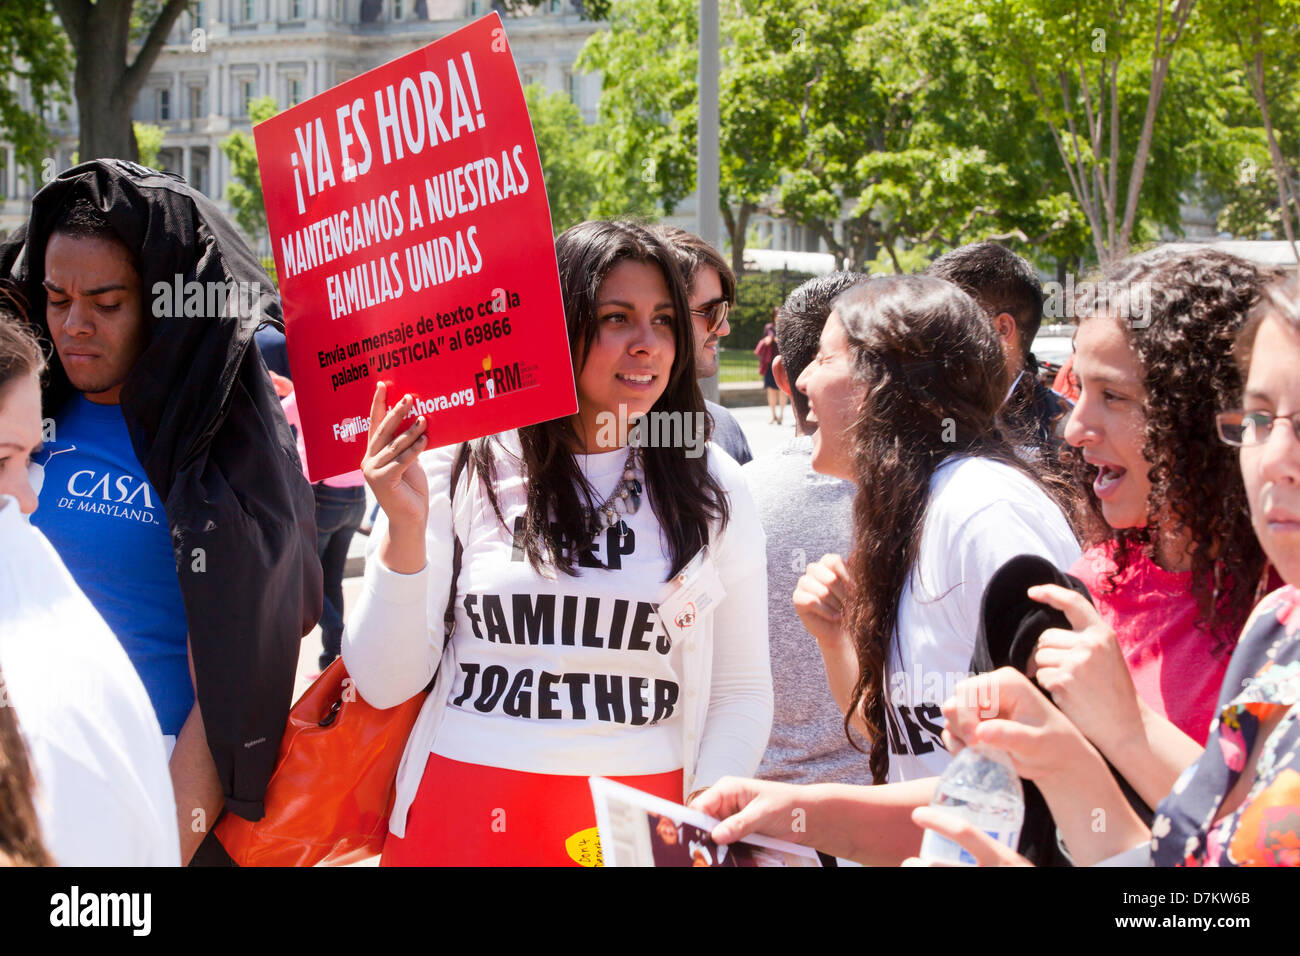 Washington DC, USA. Thursday, May 9th, 2013.  Latino immigration reform supporters in front of the White House Stock Photo